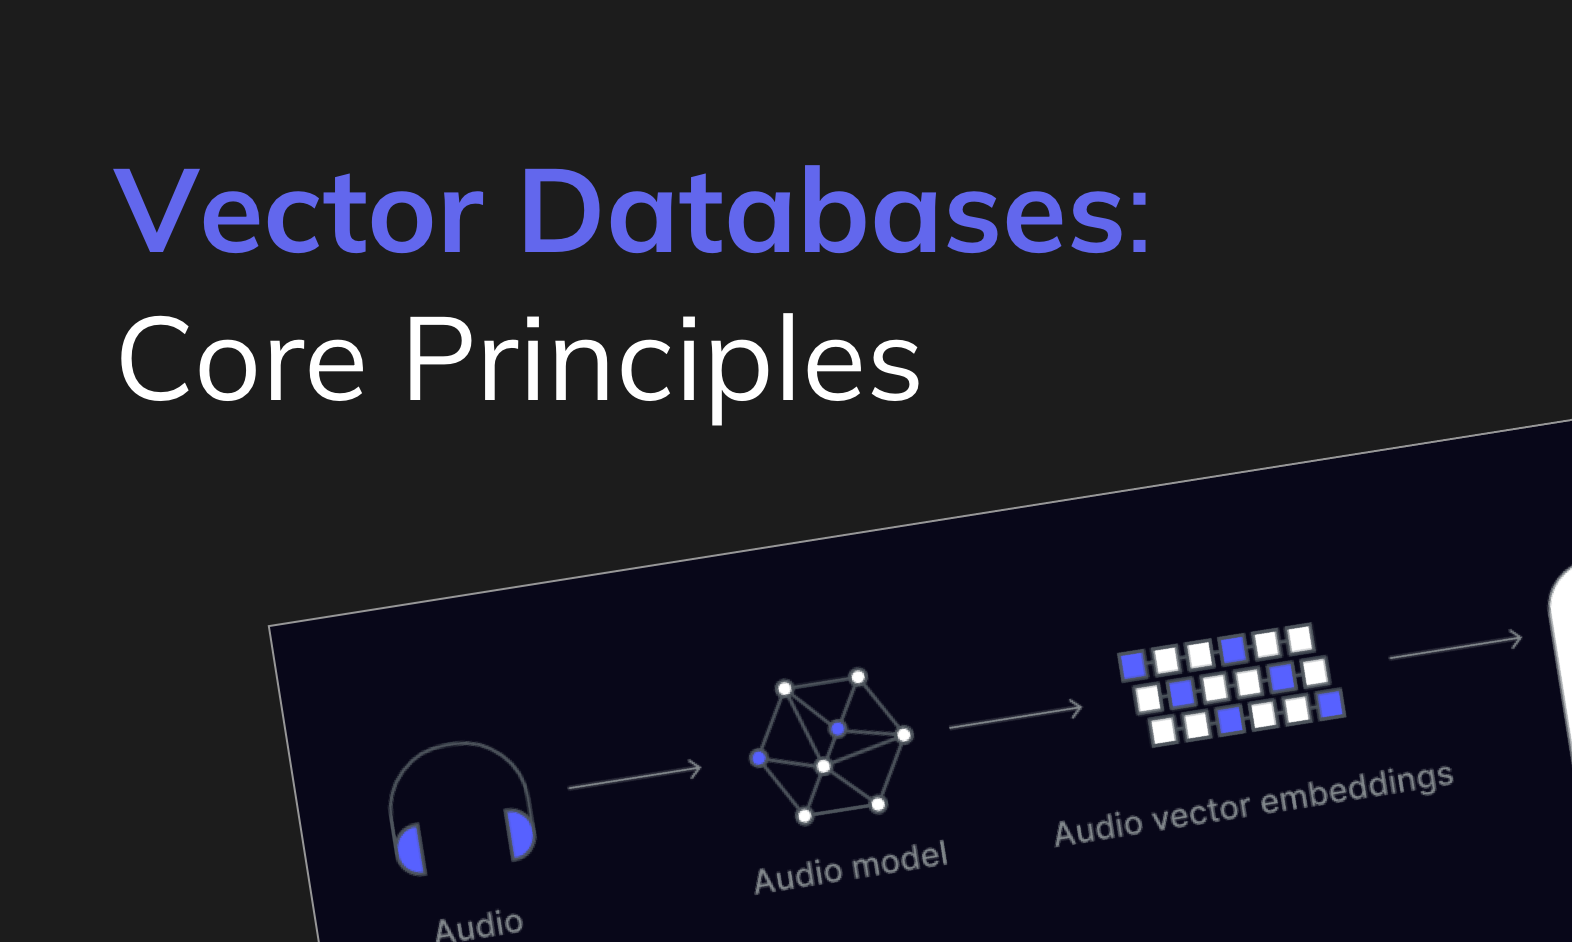 Vector Databases: Core Principles